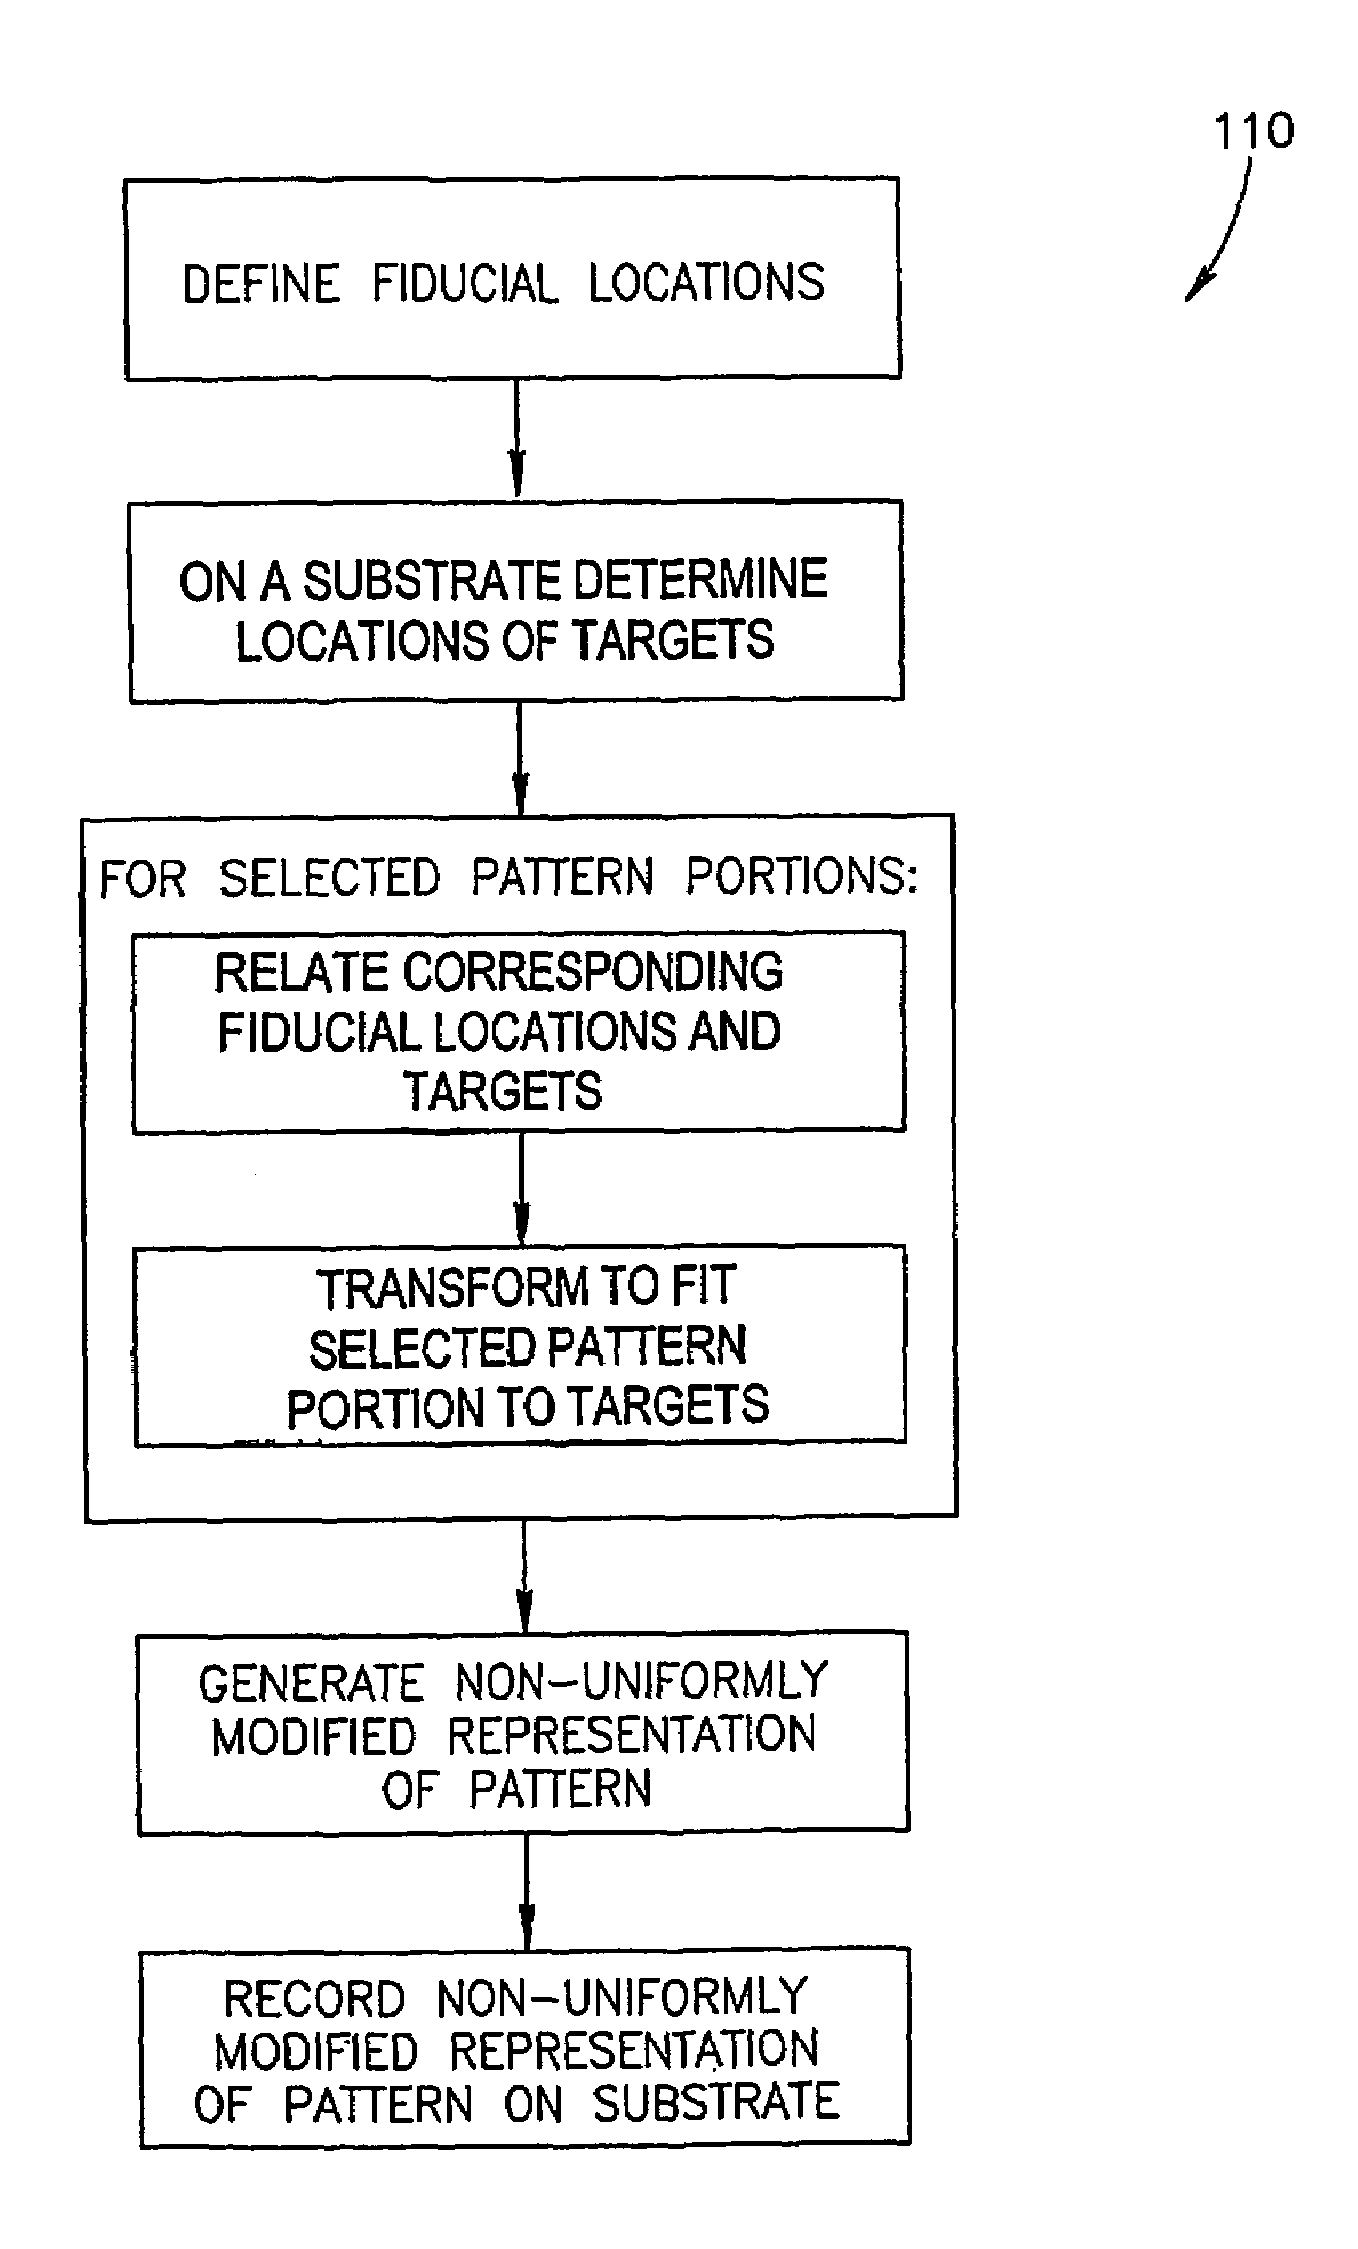 System and method for manufacturing printed circuit boards employing non-uniformly modified images